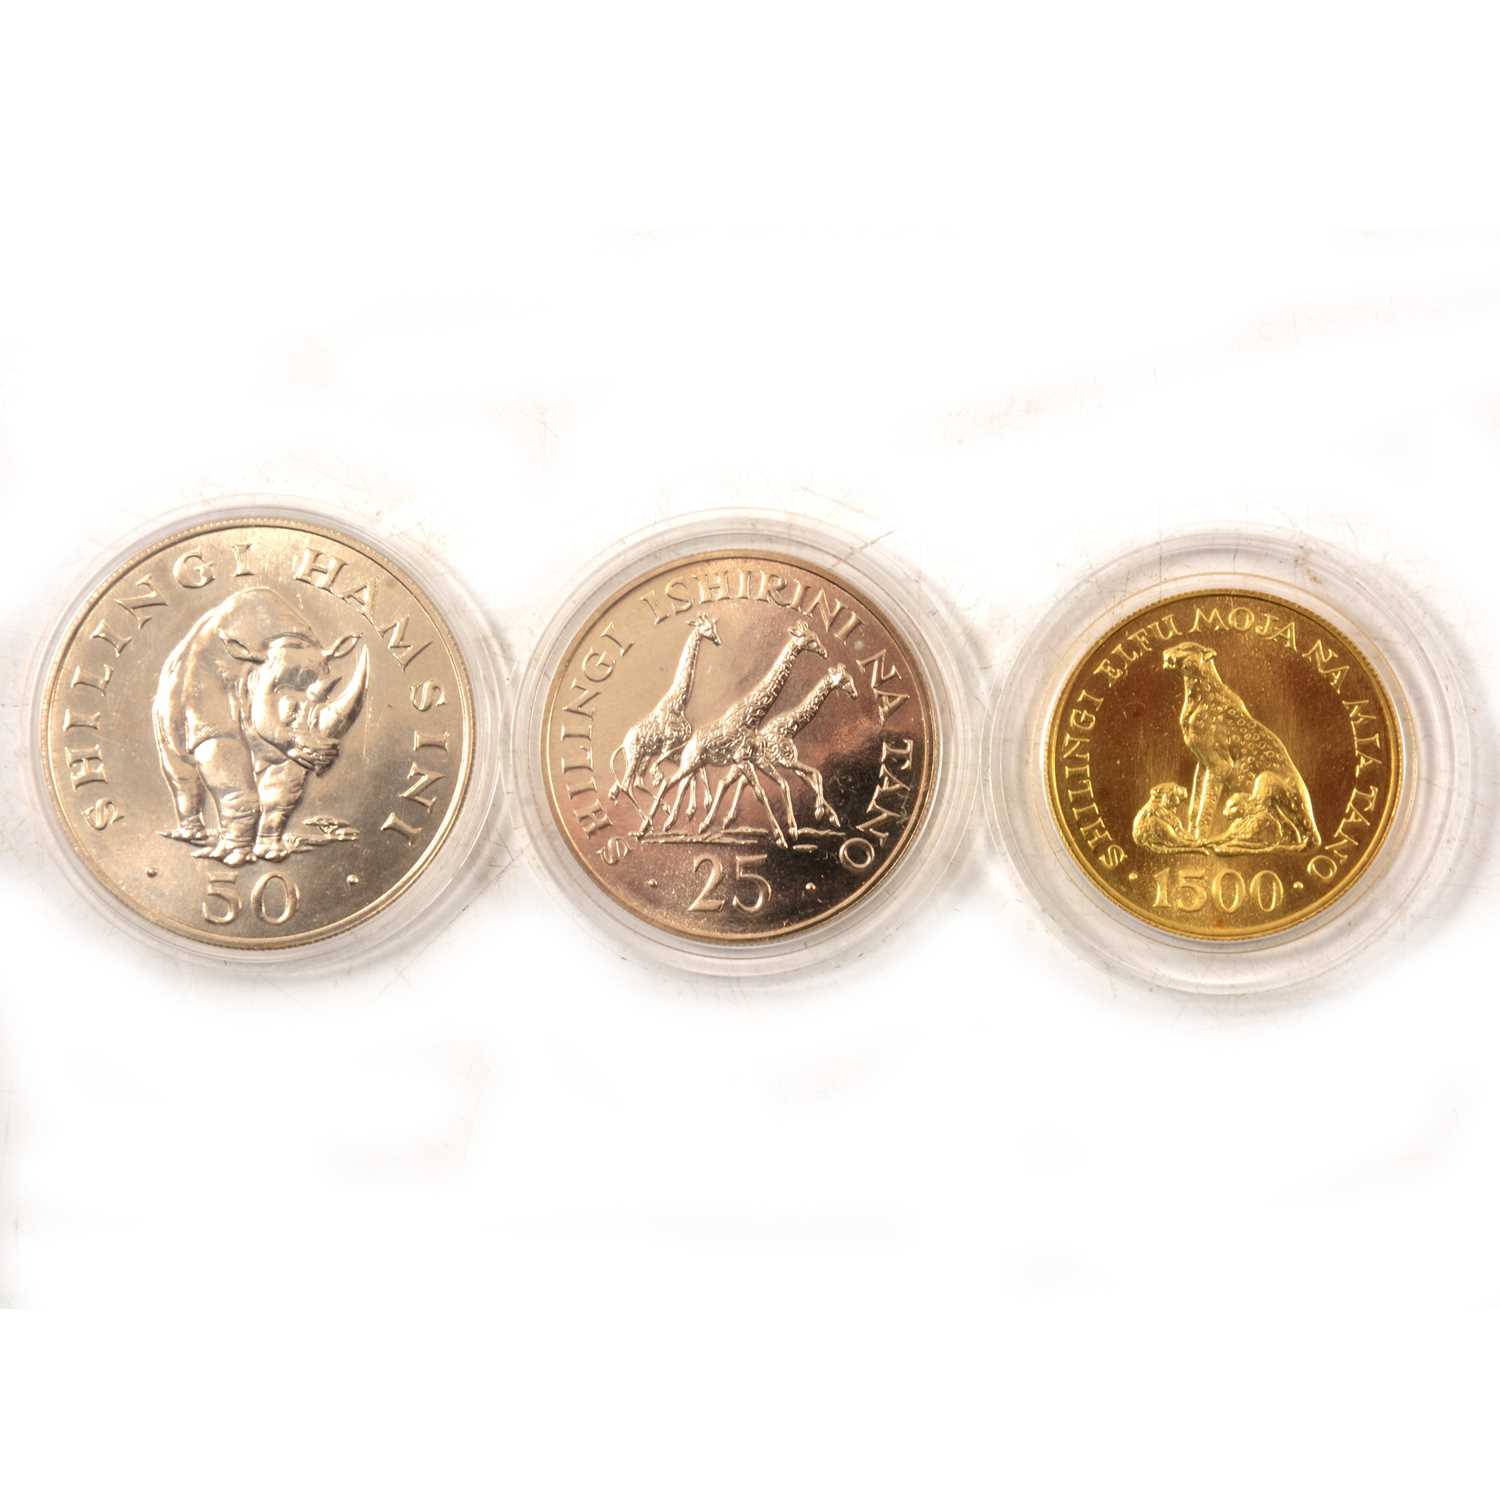 Royal Mint & WWF Conservation gold and silver three coin set, Tanzania, 1974, - Image 2 of 2